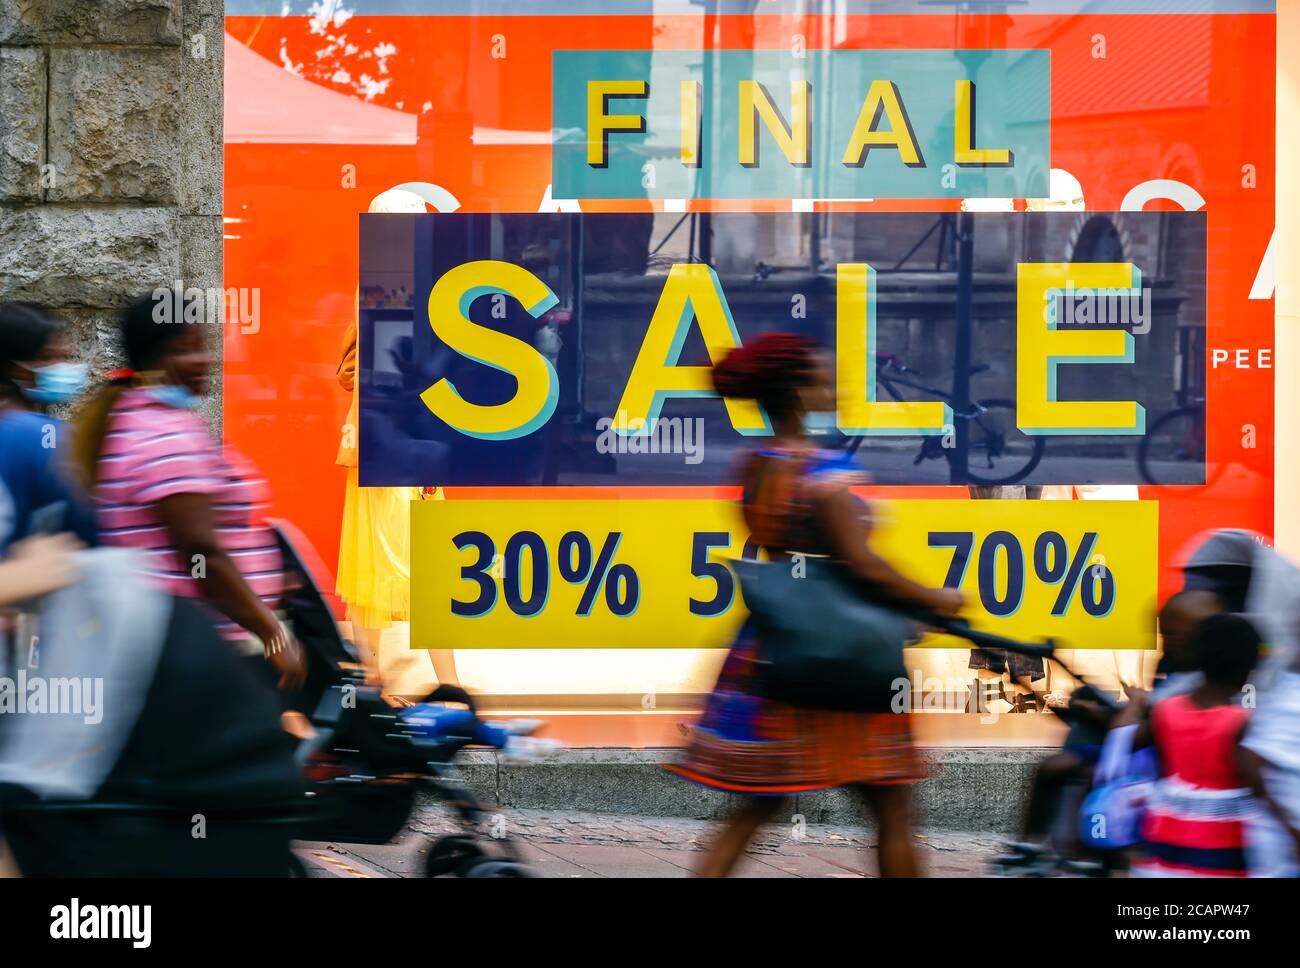 Essen, North Rhine-Westphalia, Germany - discount battle in the Corona crisis, retail sales in times of the Corona pandemic, posters in shop windows, Stock Photo